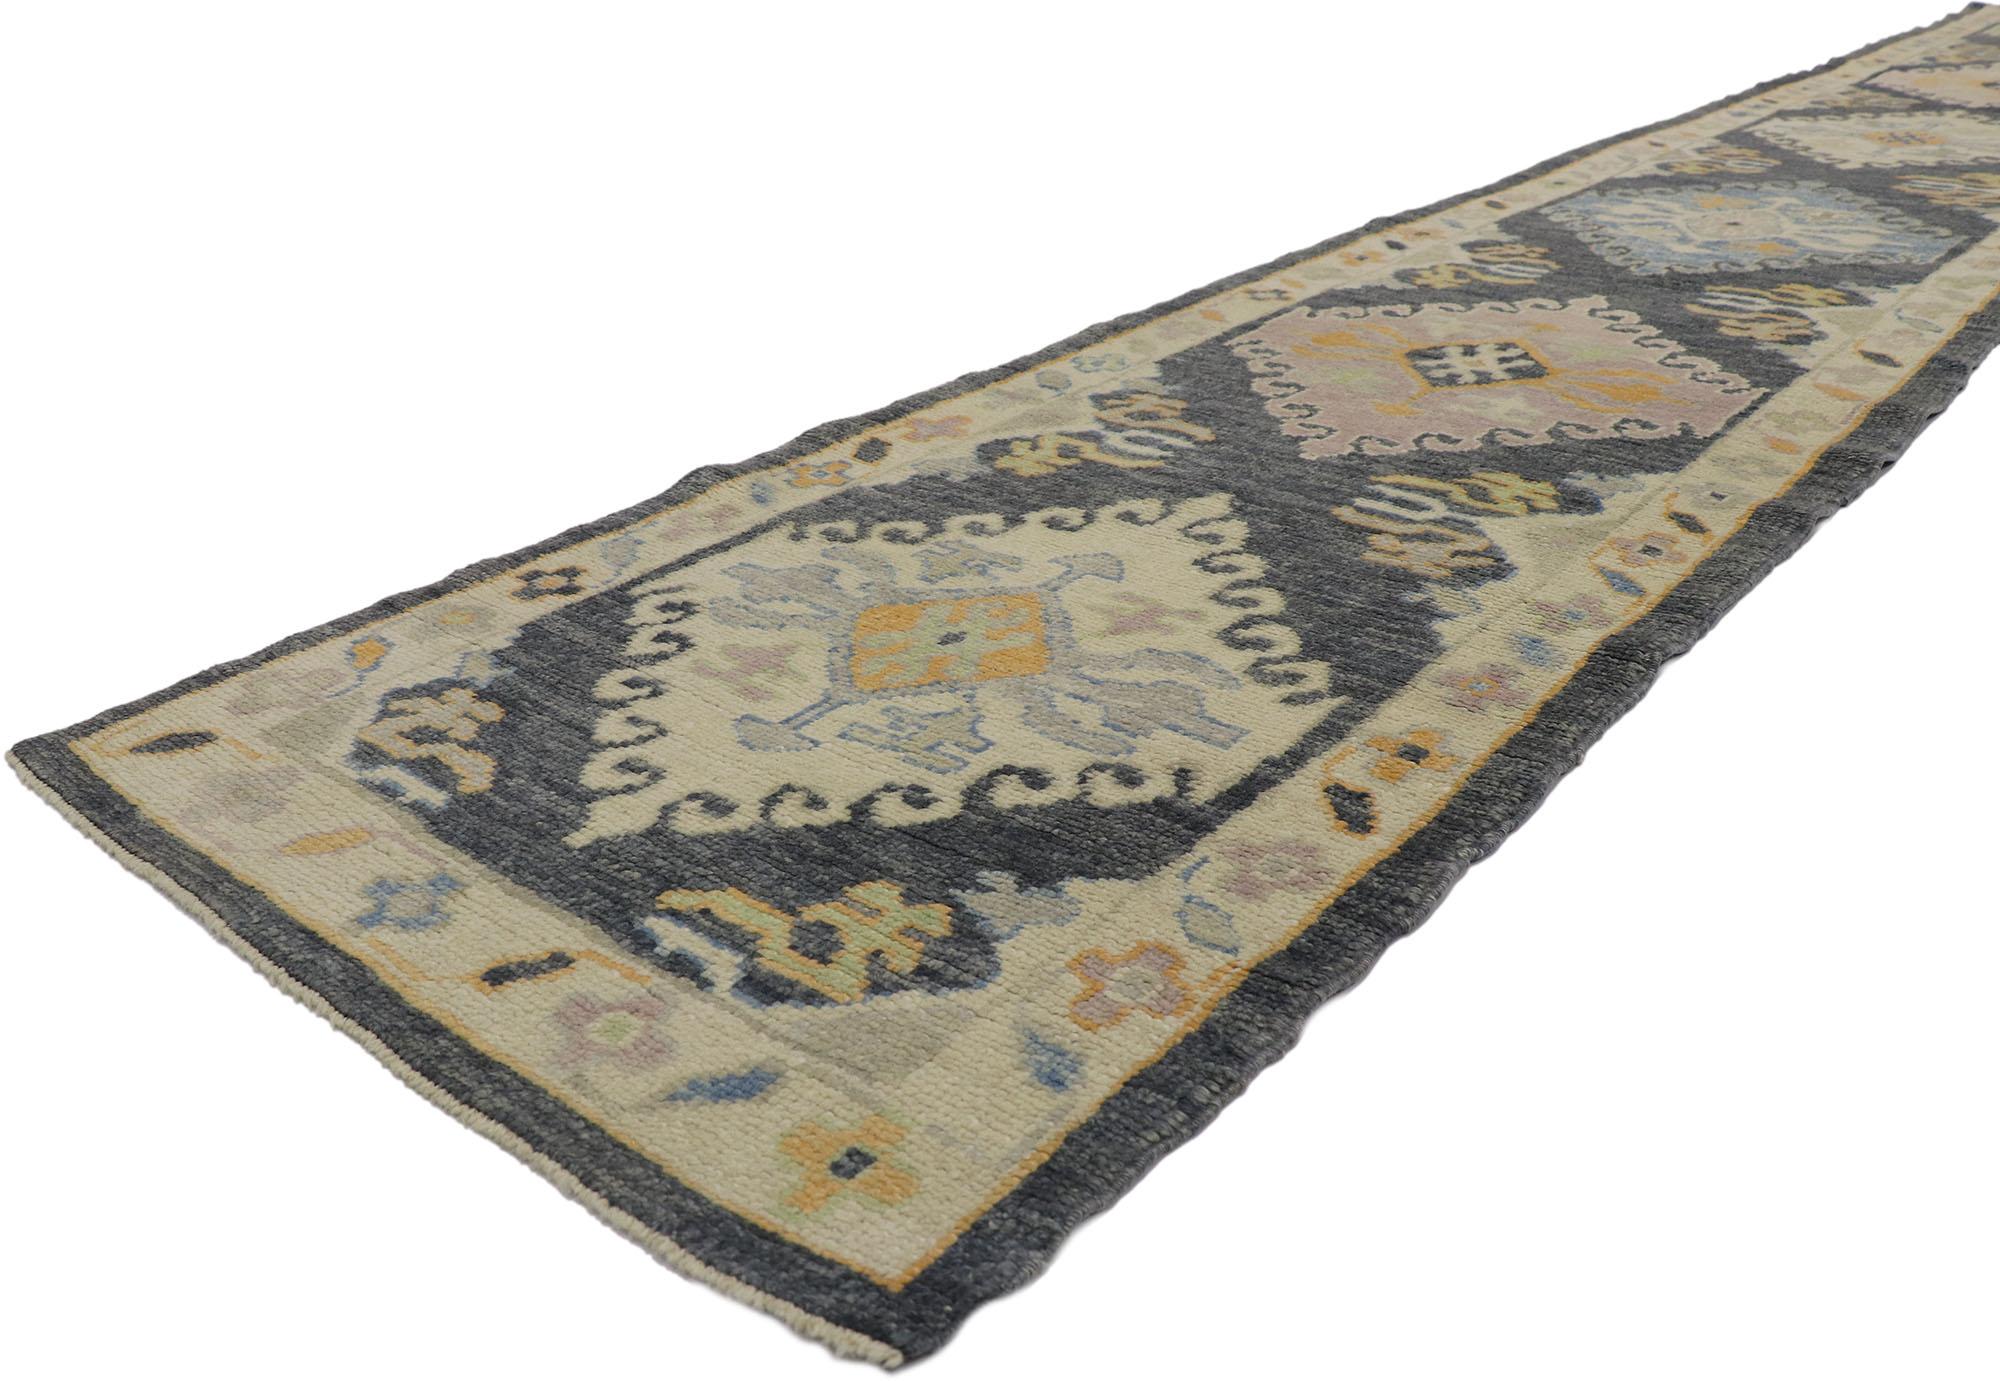 53586 New Contemporary Turkish Oushak Runner with Modern Style 02'11 x 18'02. This hand-knotted wool contemporary Turkish Oushak runner features an all-over geometric design spread across an abrashed charcoal and navy blue striated field. An array